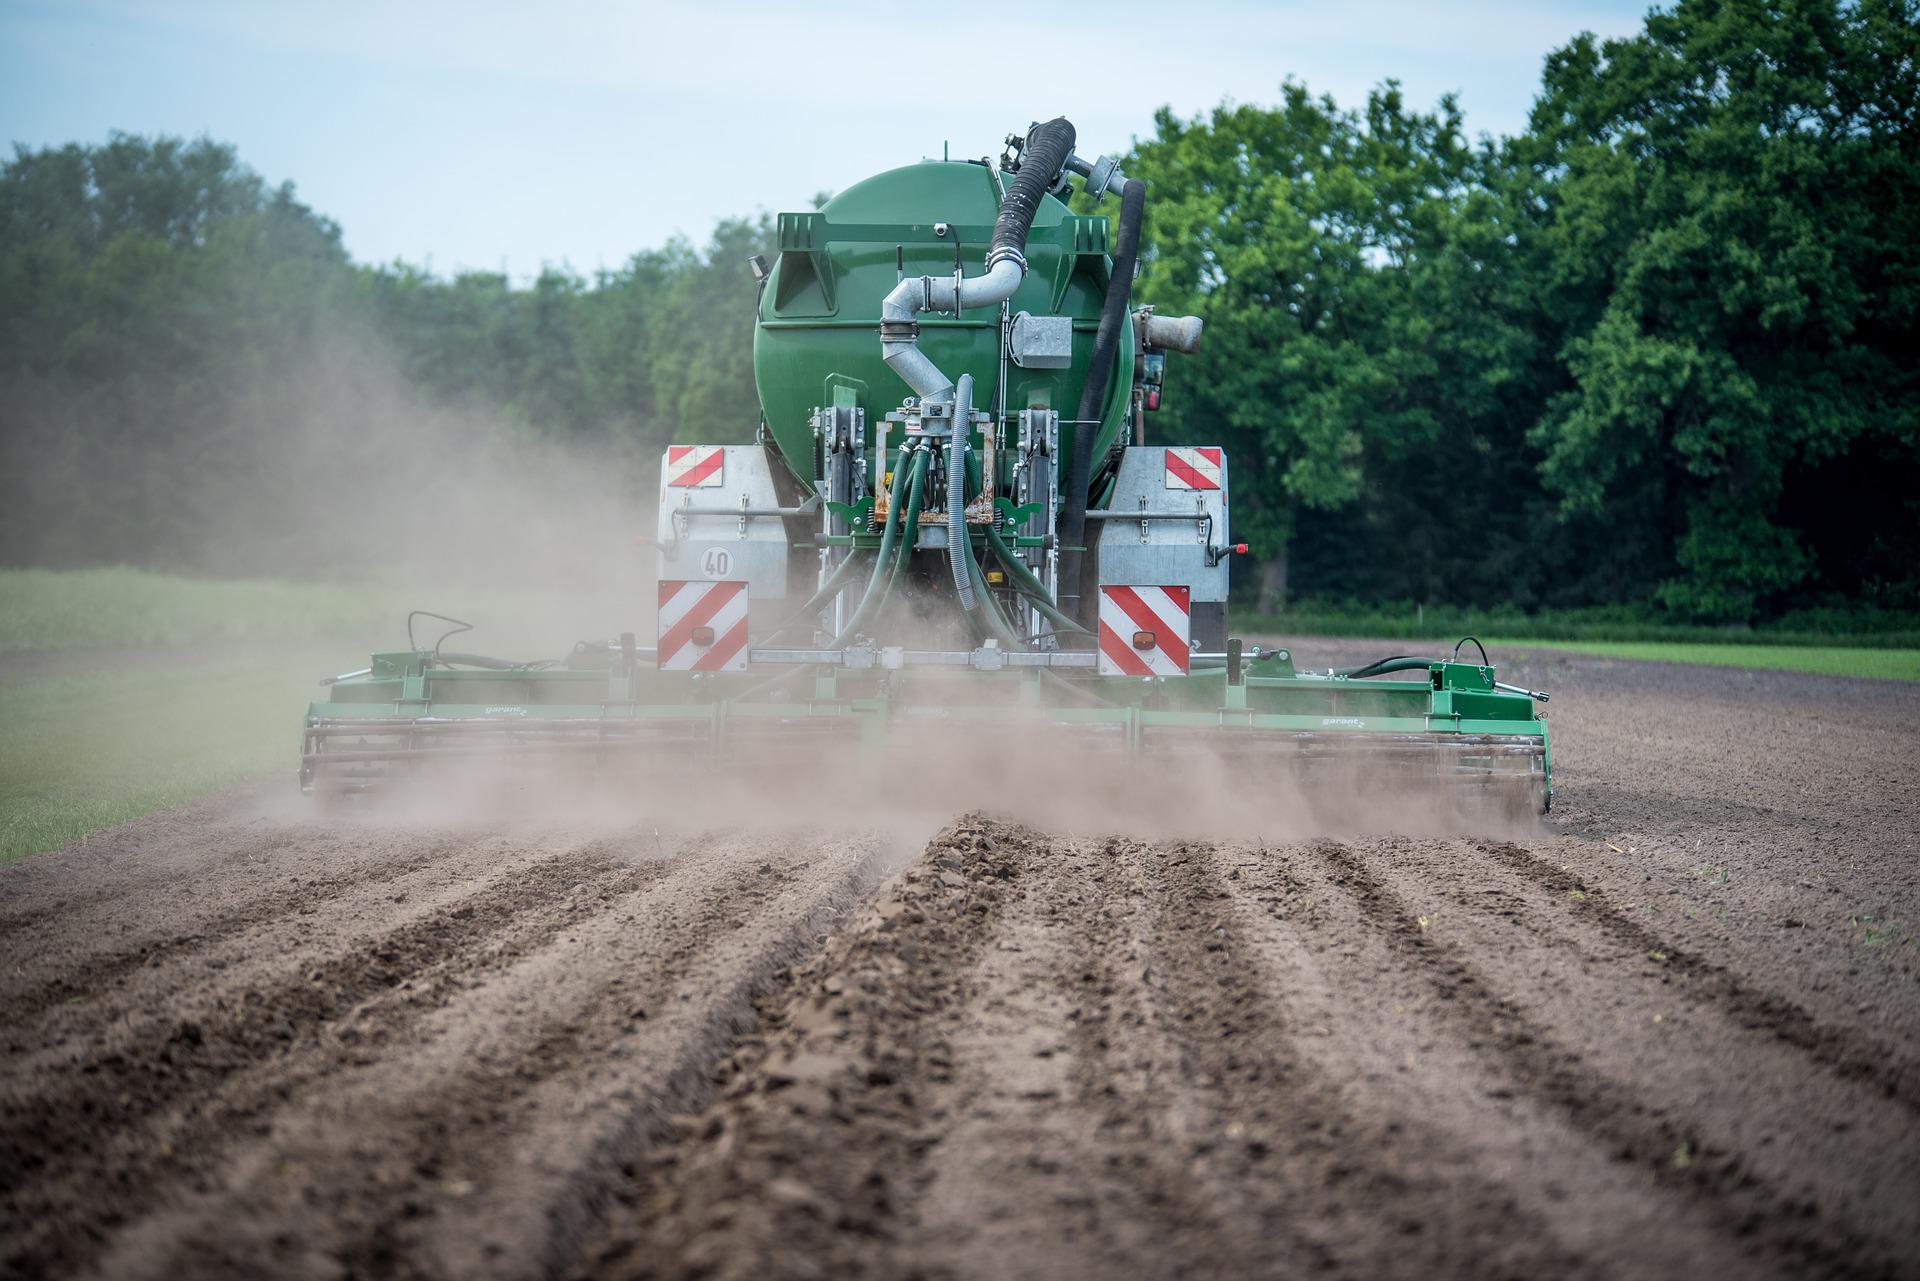 Spreading fertilizer on a field with a tractor.